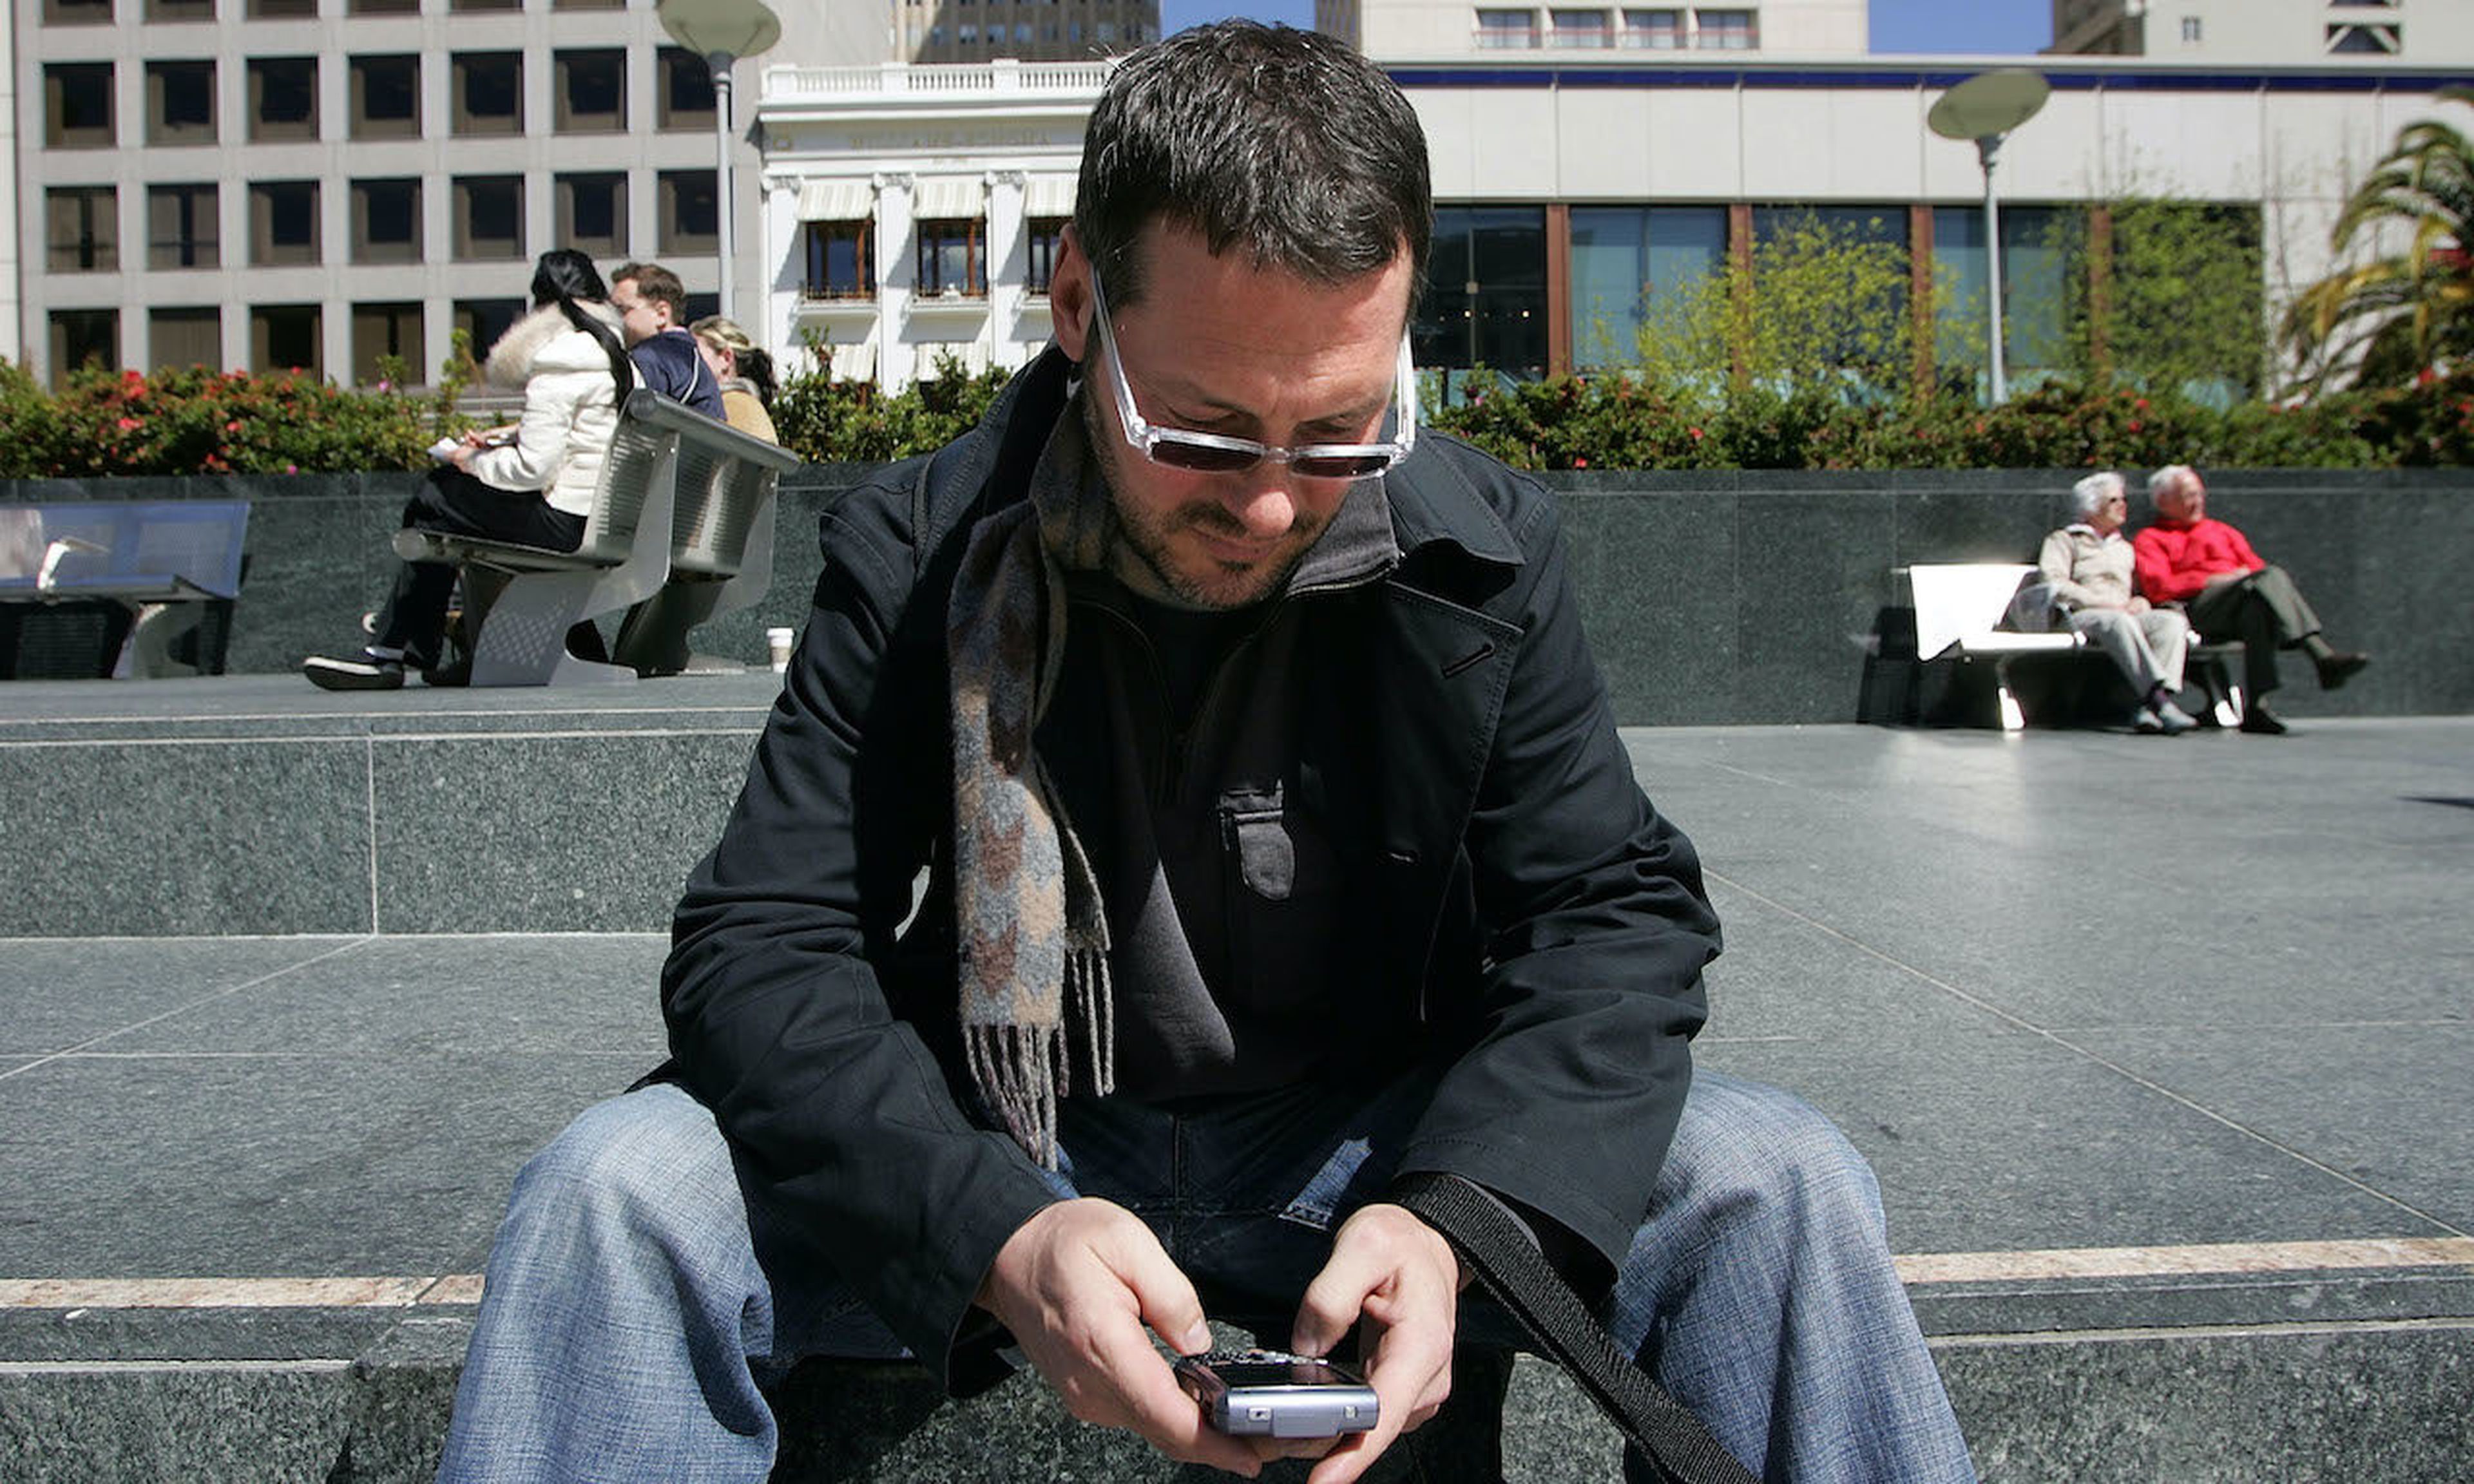 BlackBerry user Douglas Philips checks emails on his BlackBerry in 2007 in San Francisco, California. A new tool available on the dark web allows cyberattackers to abuse a special feature of the Internet Message Access Protocol used for remote email access.  (Photo by Justin Sullivan/Getty Images)